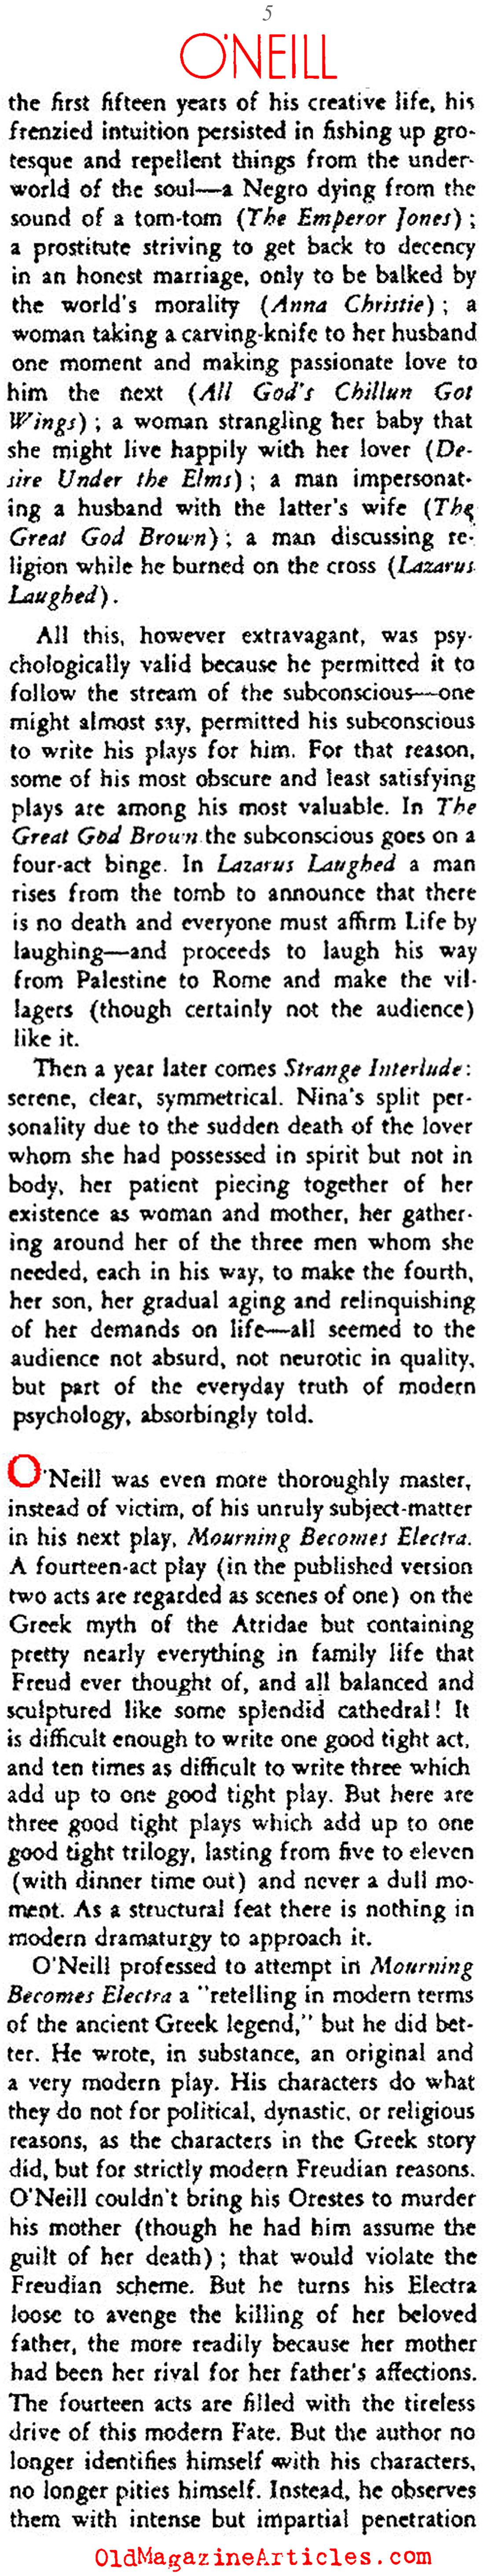 What's Next for Eugene O'Neill? (Stage Magazine, 1935)